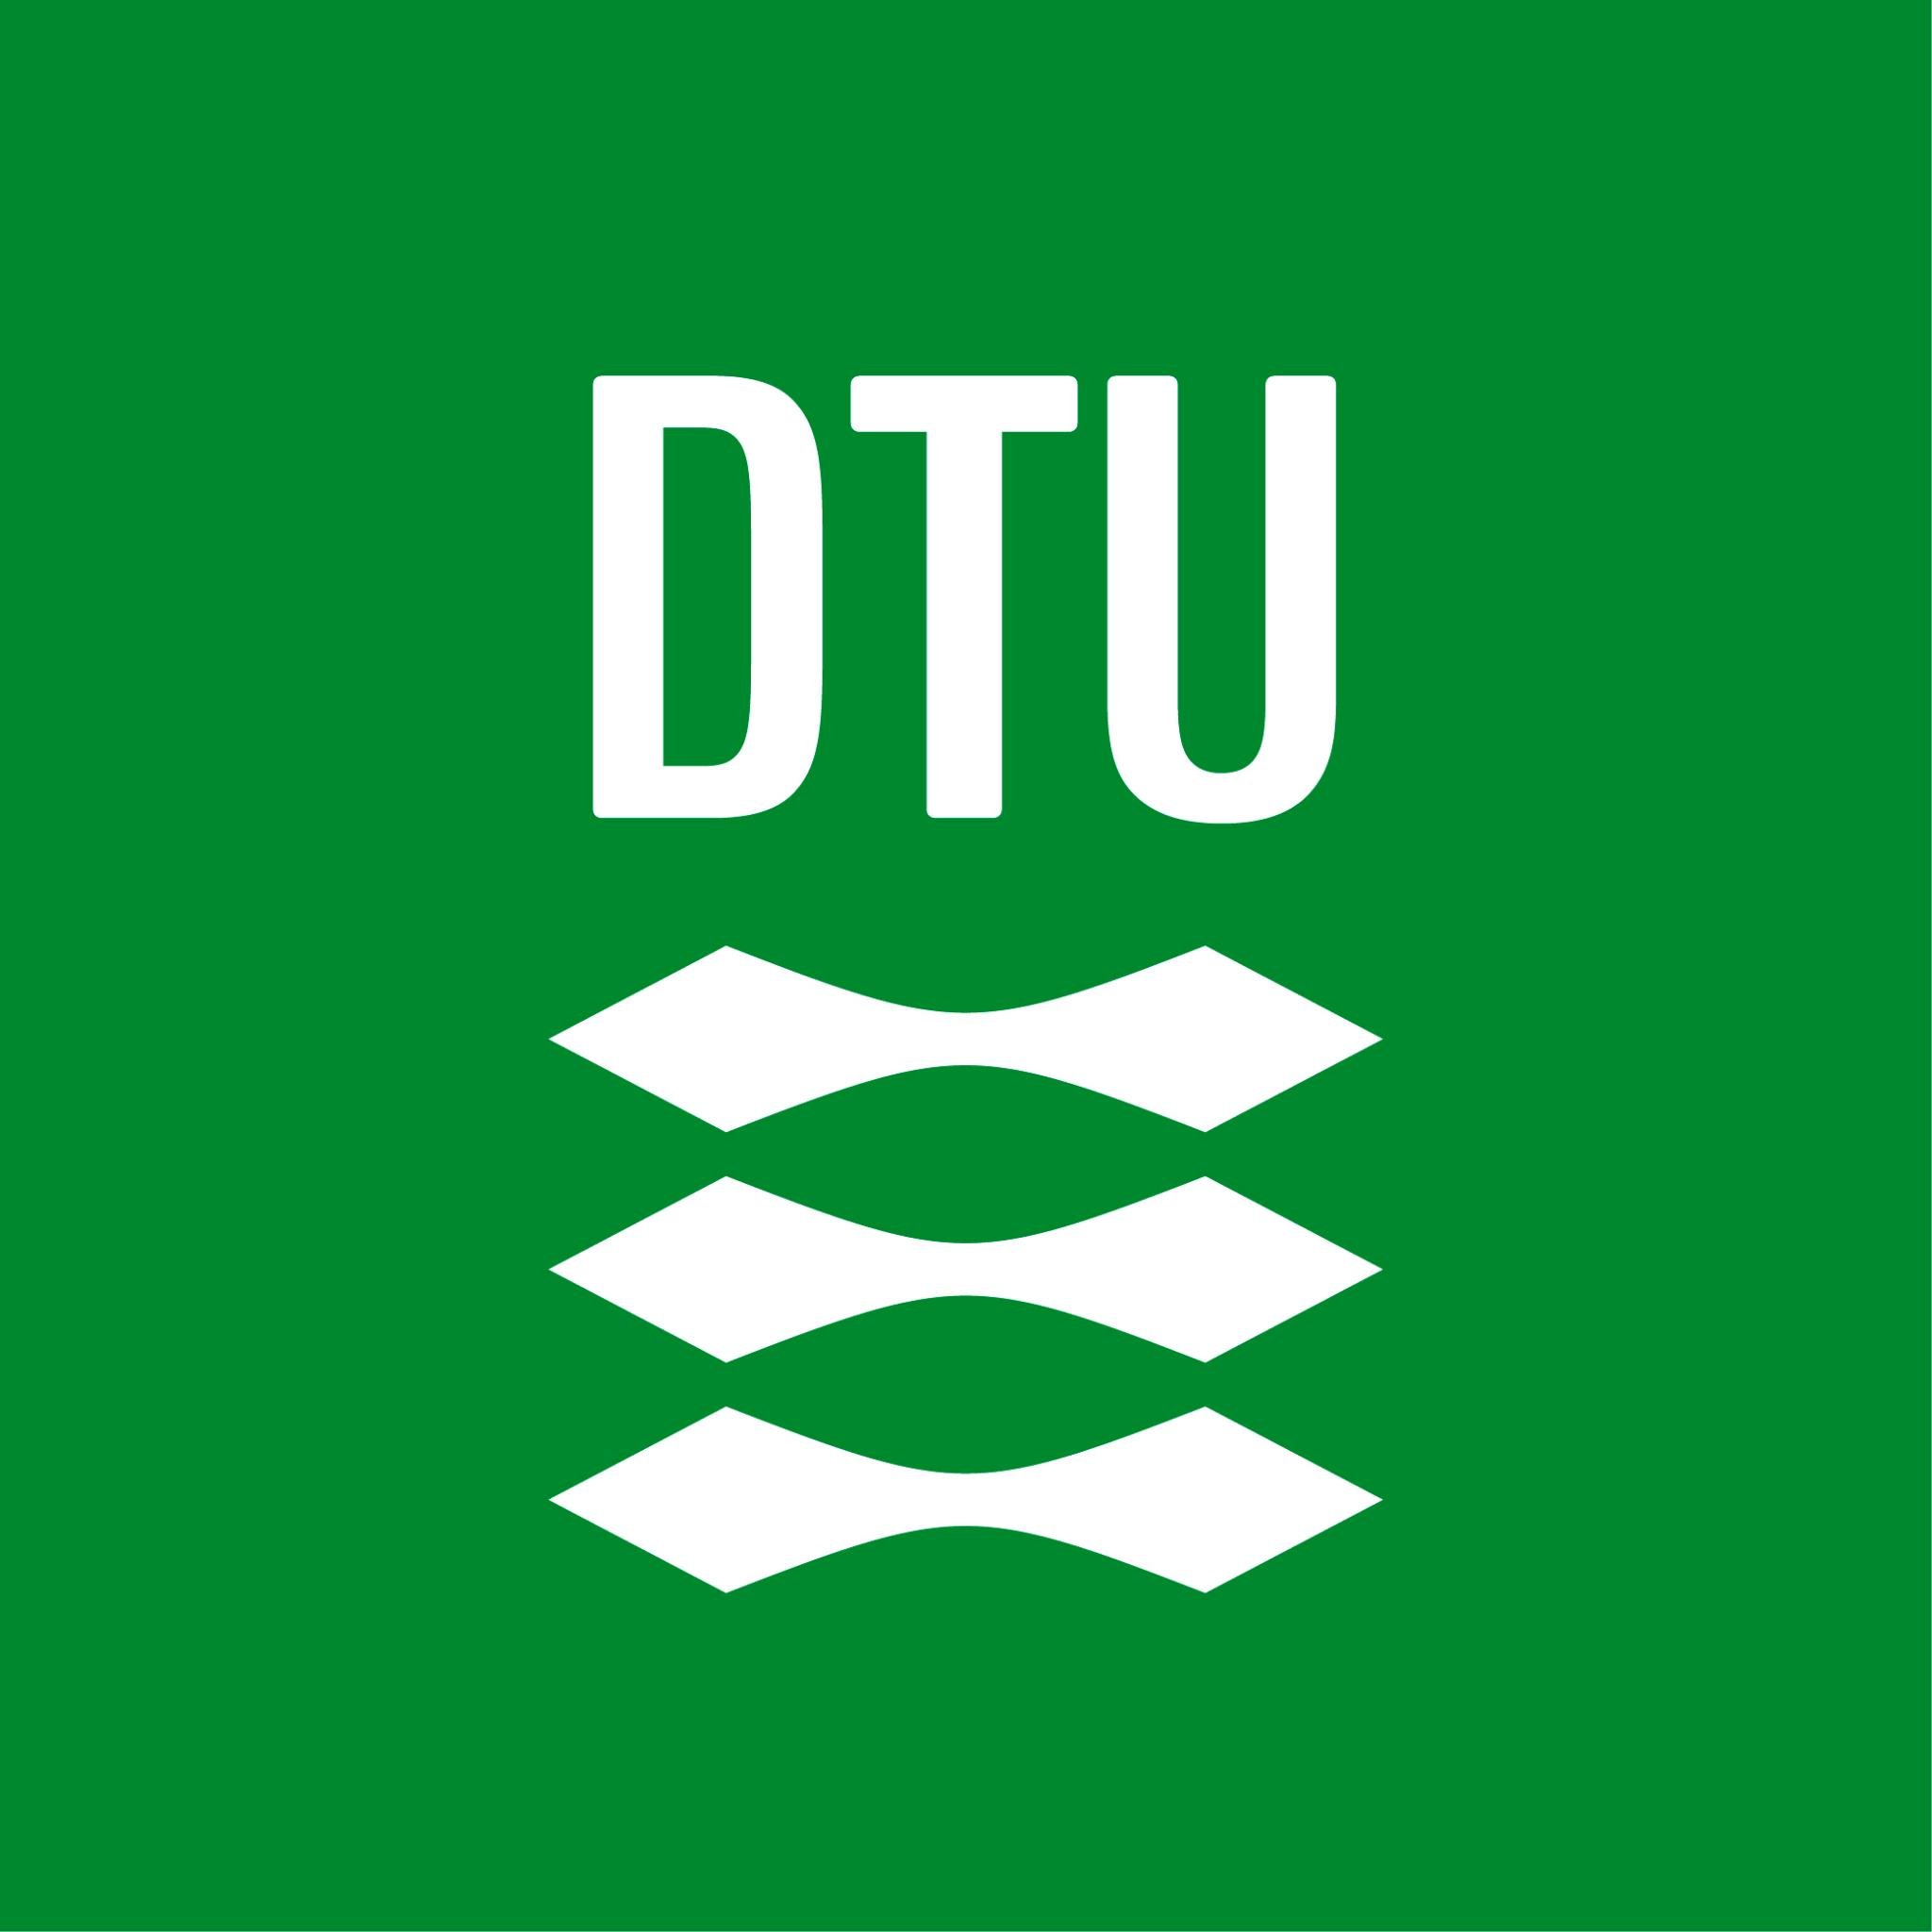 A cross-disciplinary research department at the Technical University of Denmark, developing sustainable technologies for energy conversion and storage.